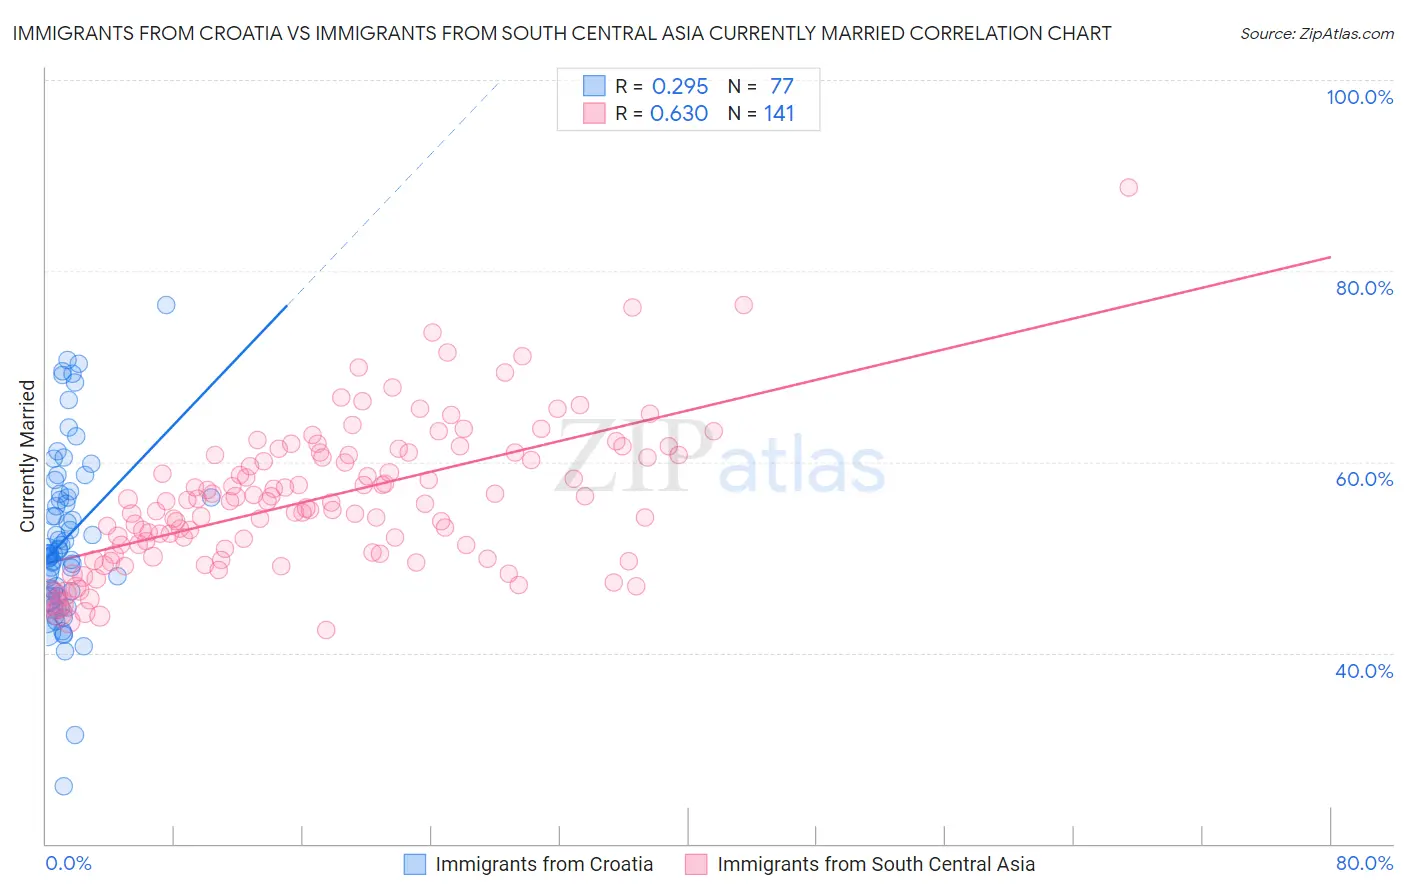 Immigrants from Croatia vs Immigrants from South Central Asia Currently Married